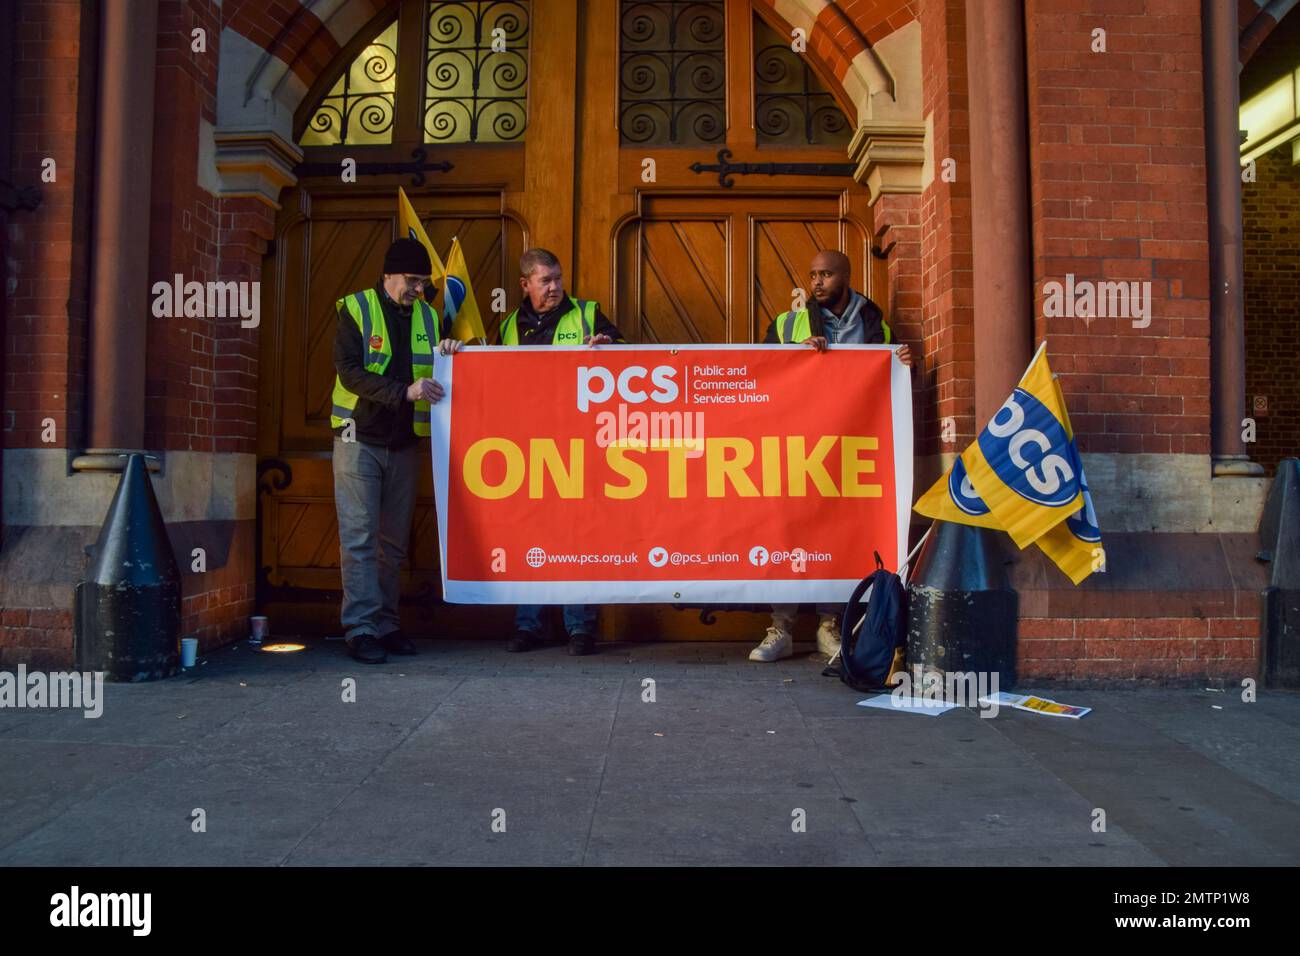 London, UK. 1st February 2023. PCS (Public and Commercial Services Union) picket outside St Pancras International Station, as Border Force workers go on strike. The day has seen around half a million people staging walkouts around the UK, including teachers, university staff, public service workers and train drivers. Credit: Vuk Valcic/Alamy Live News. Stock Photo